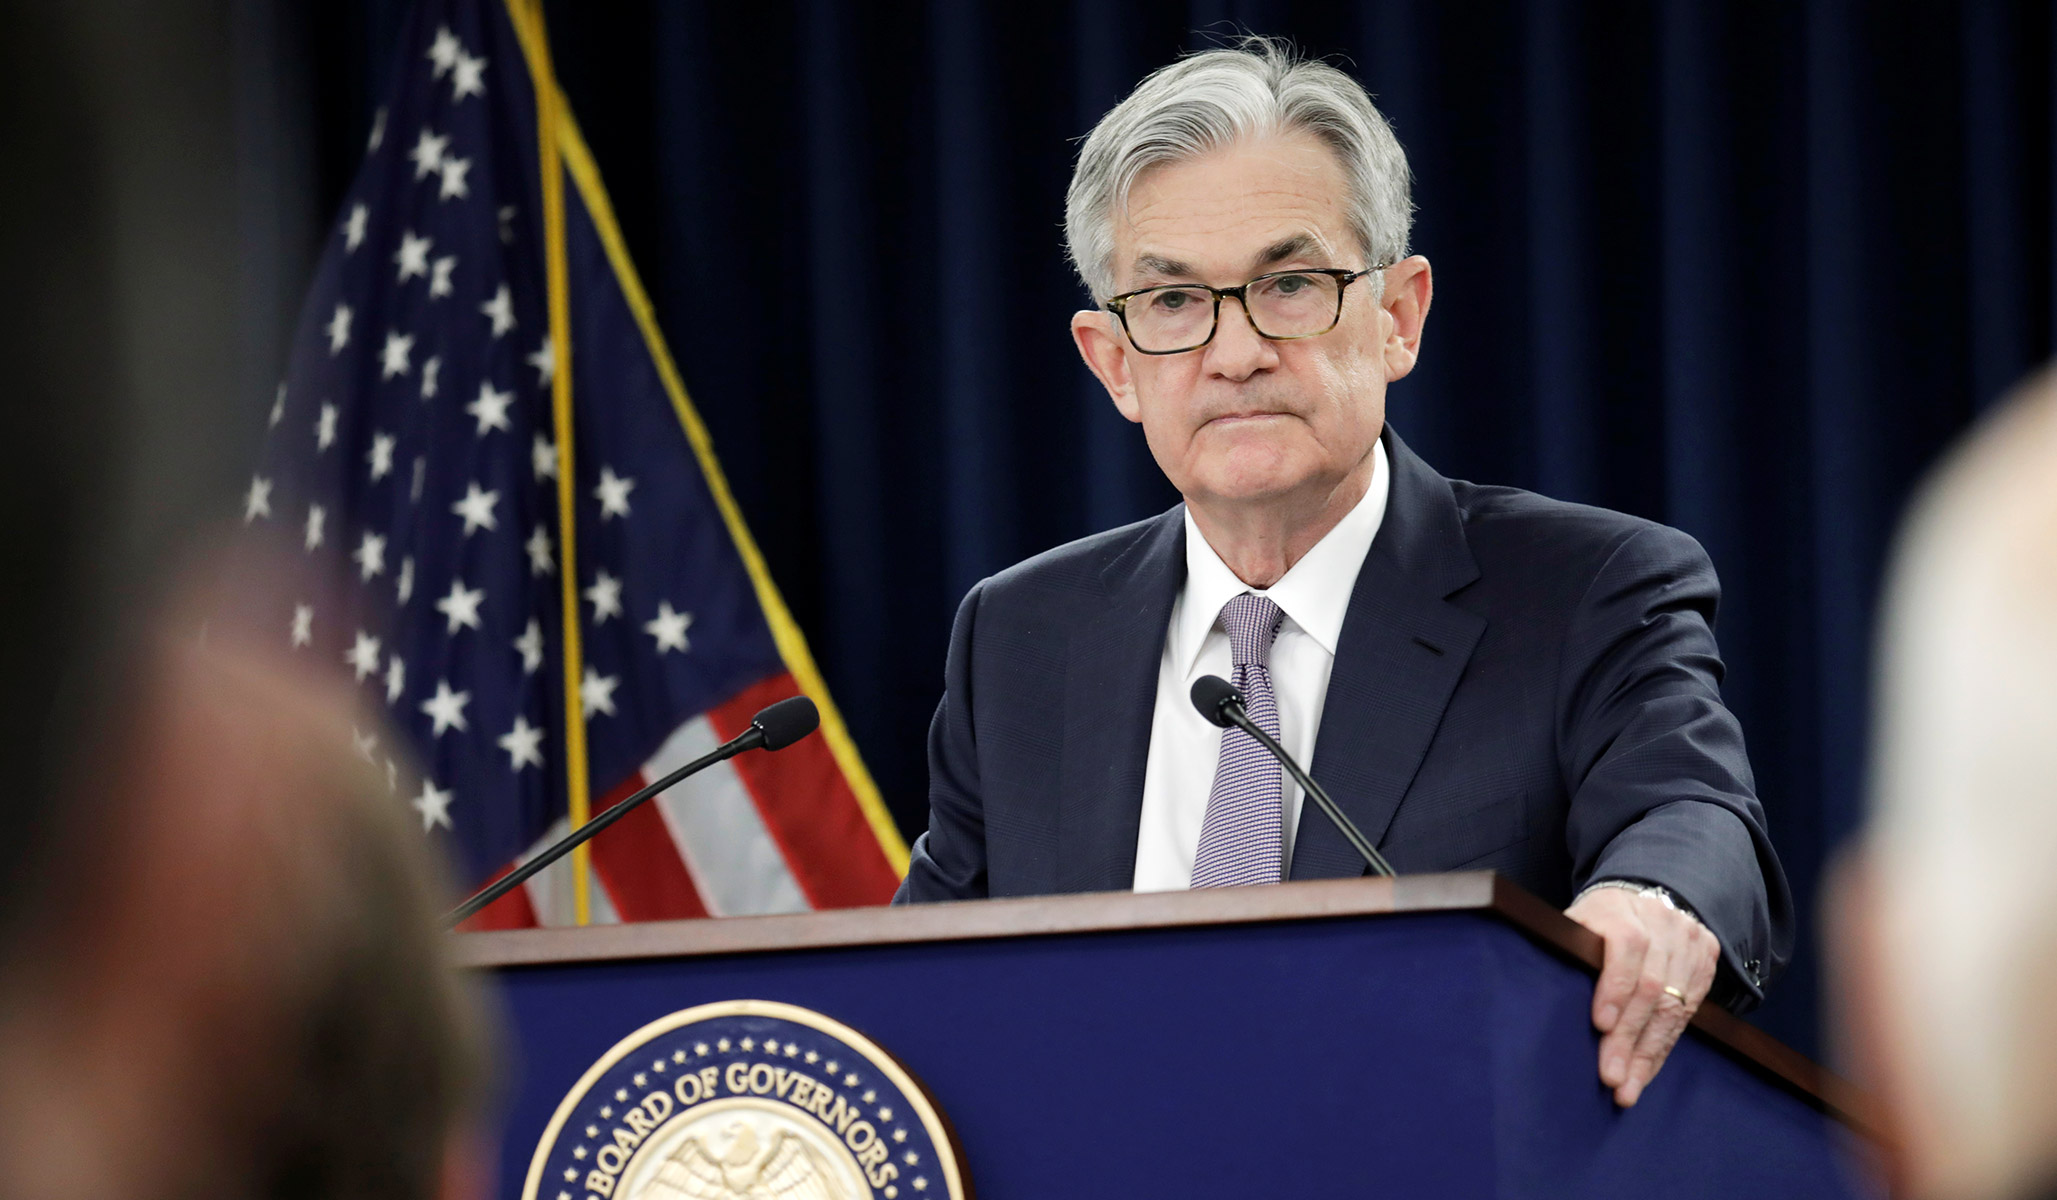 The Fed Signals Likely Interest-Rate Hike in March to Curb Inflation